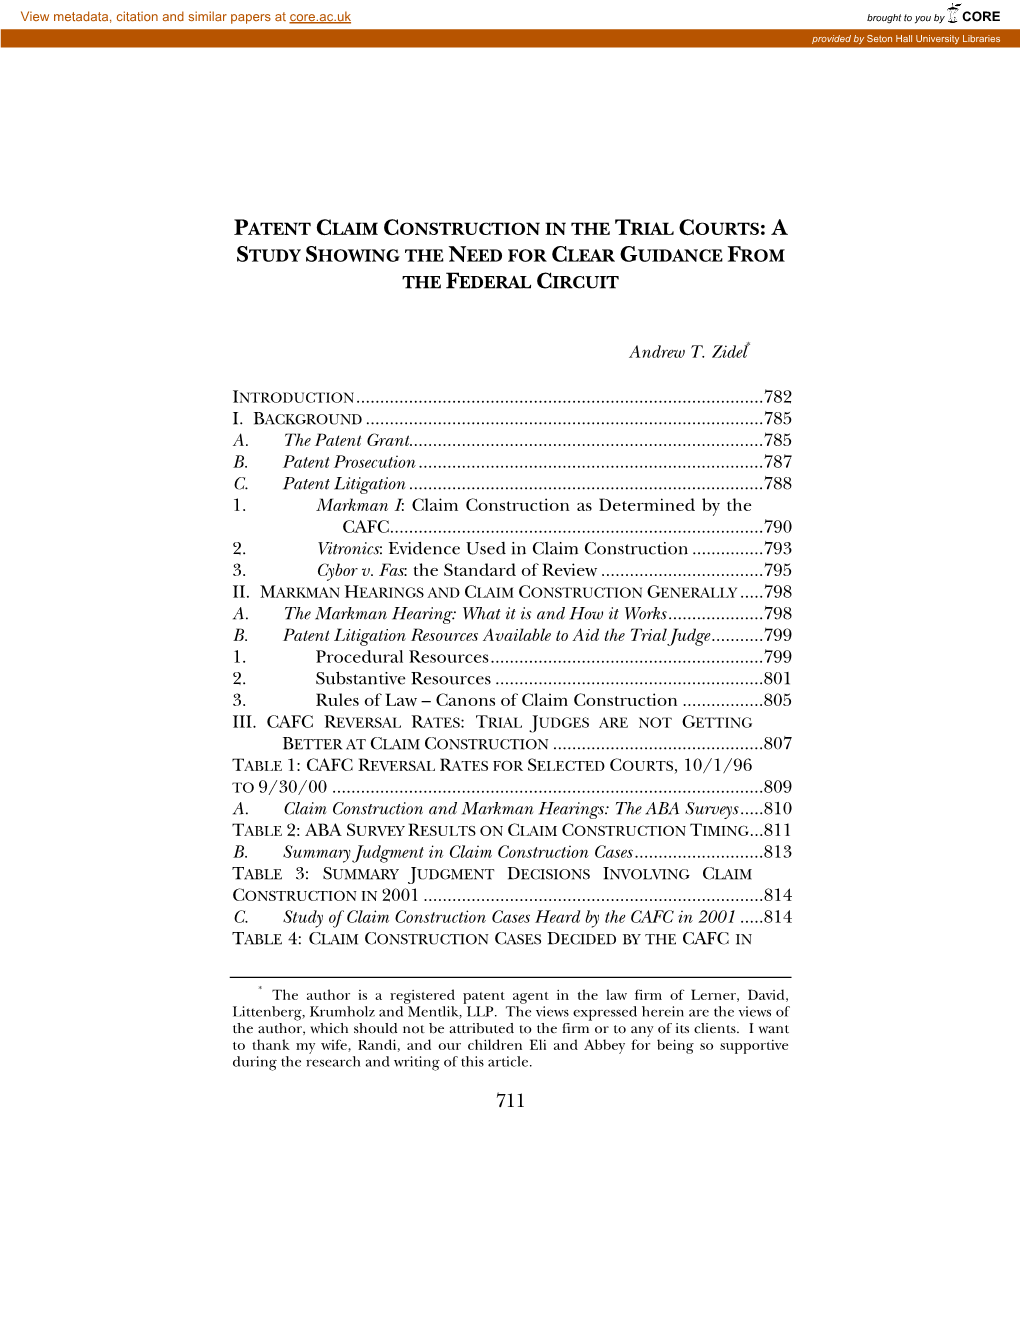 Patent Claim Construction in the Trial Courts: a Study Showing the Need for Clear Guidance from the Federal Circuit